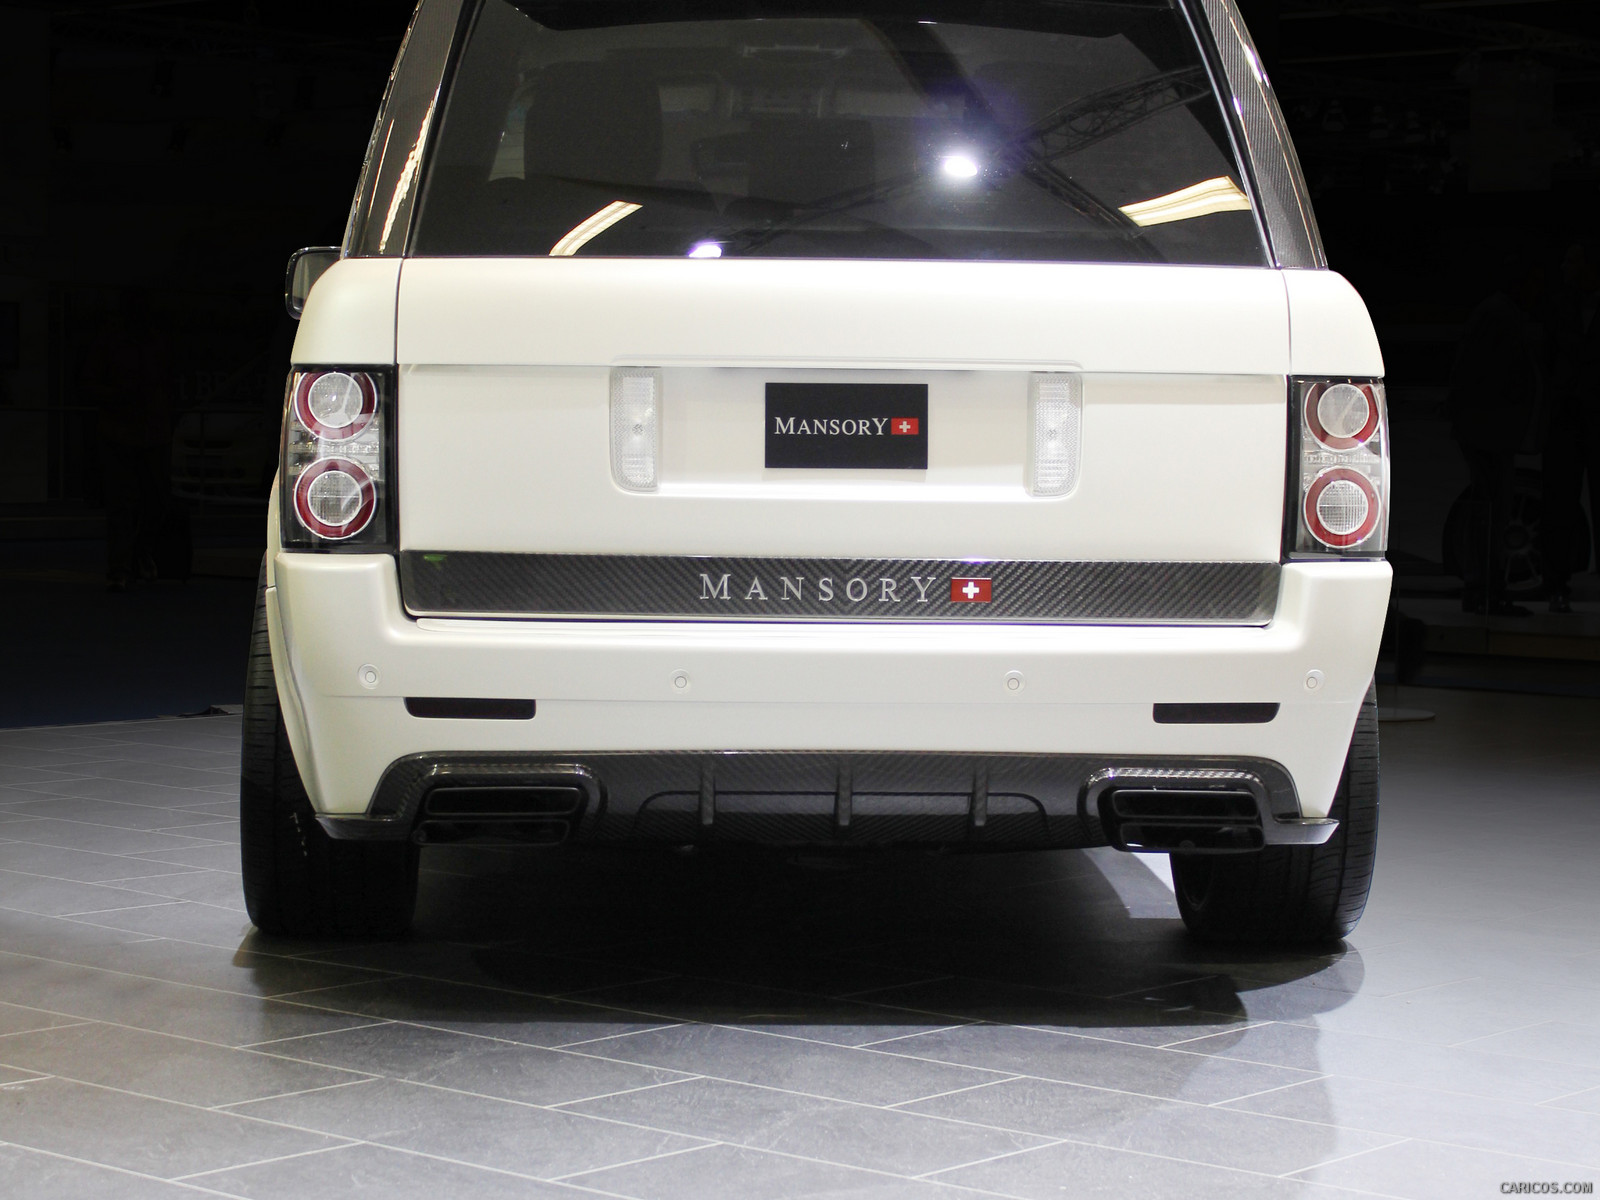 2011 Mansory Range Rover Vogue  - Rear, #3 of 4